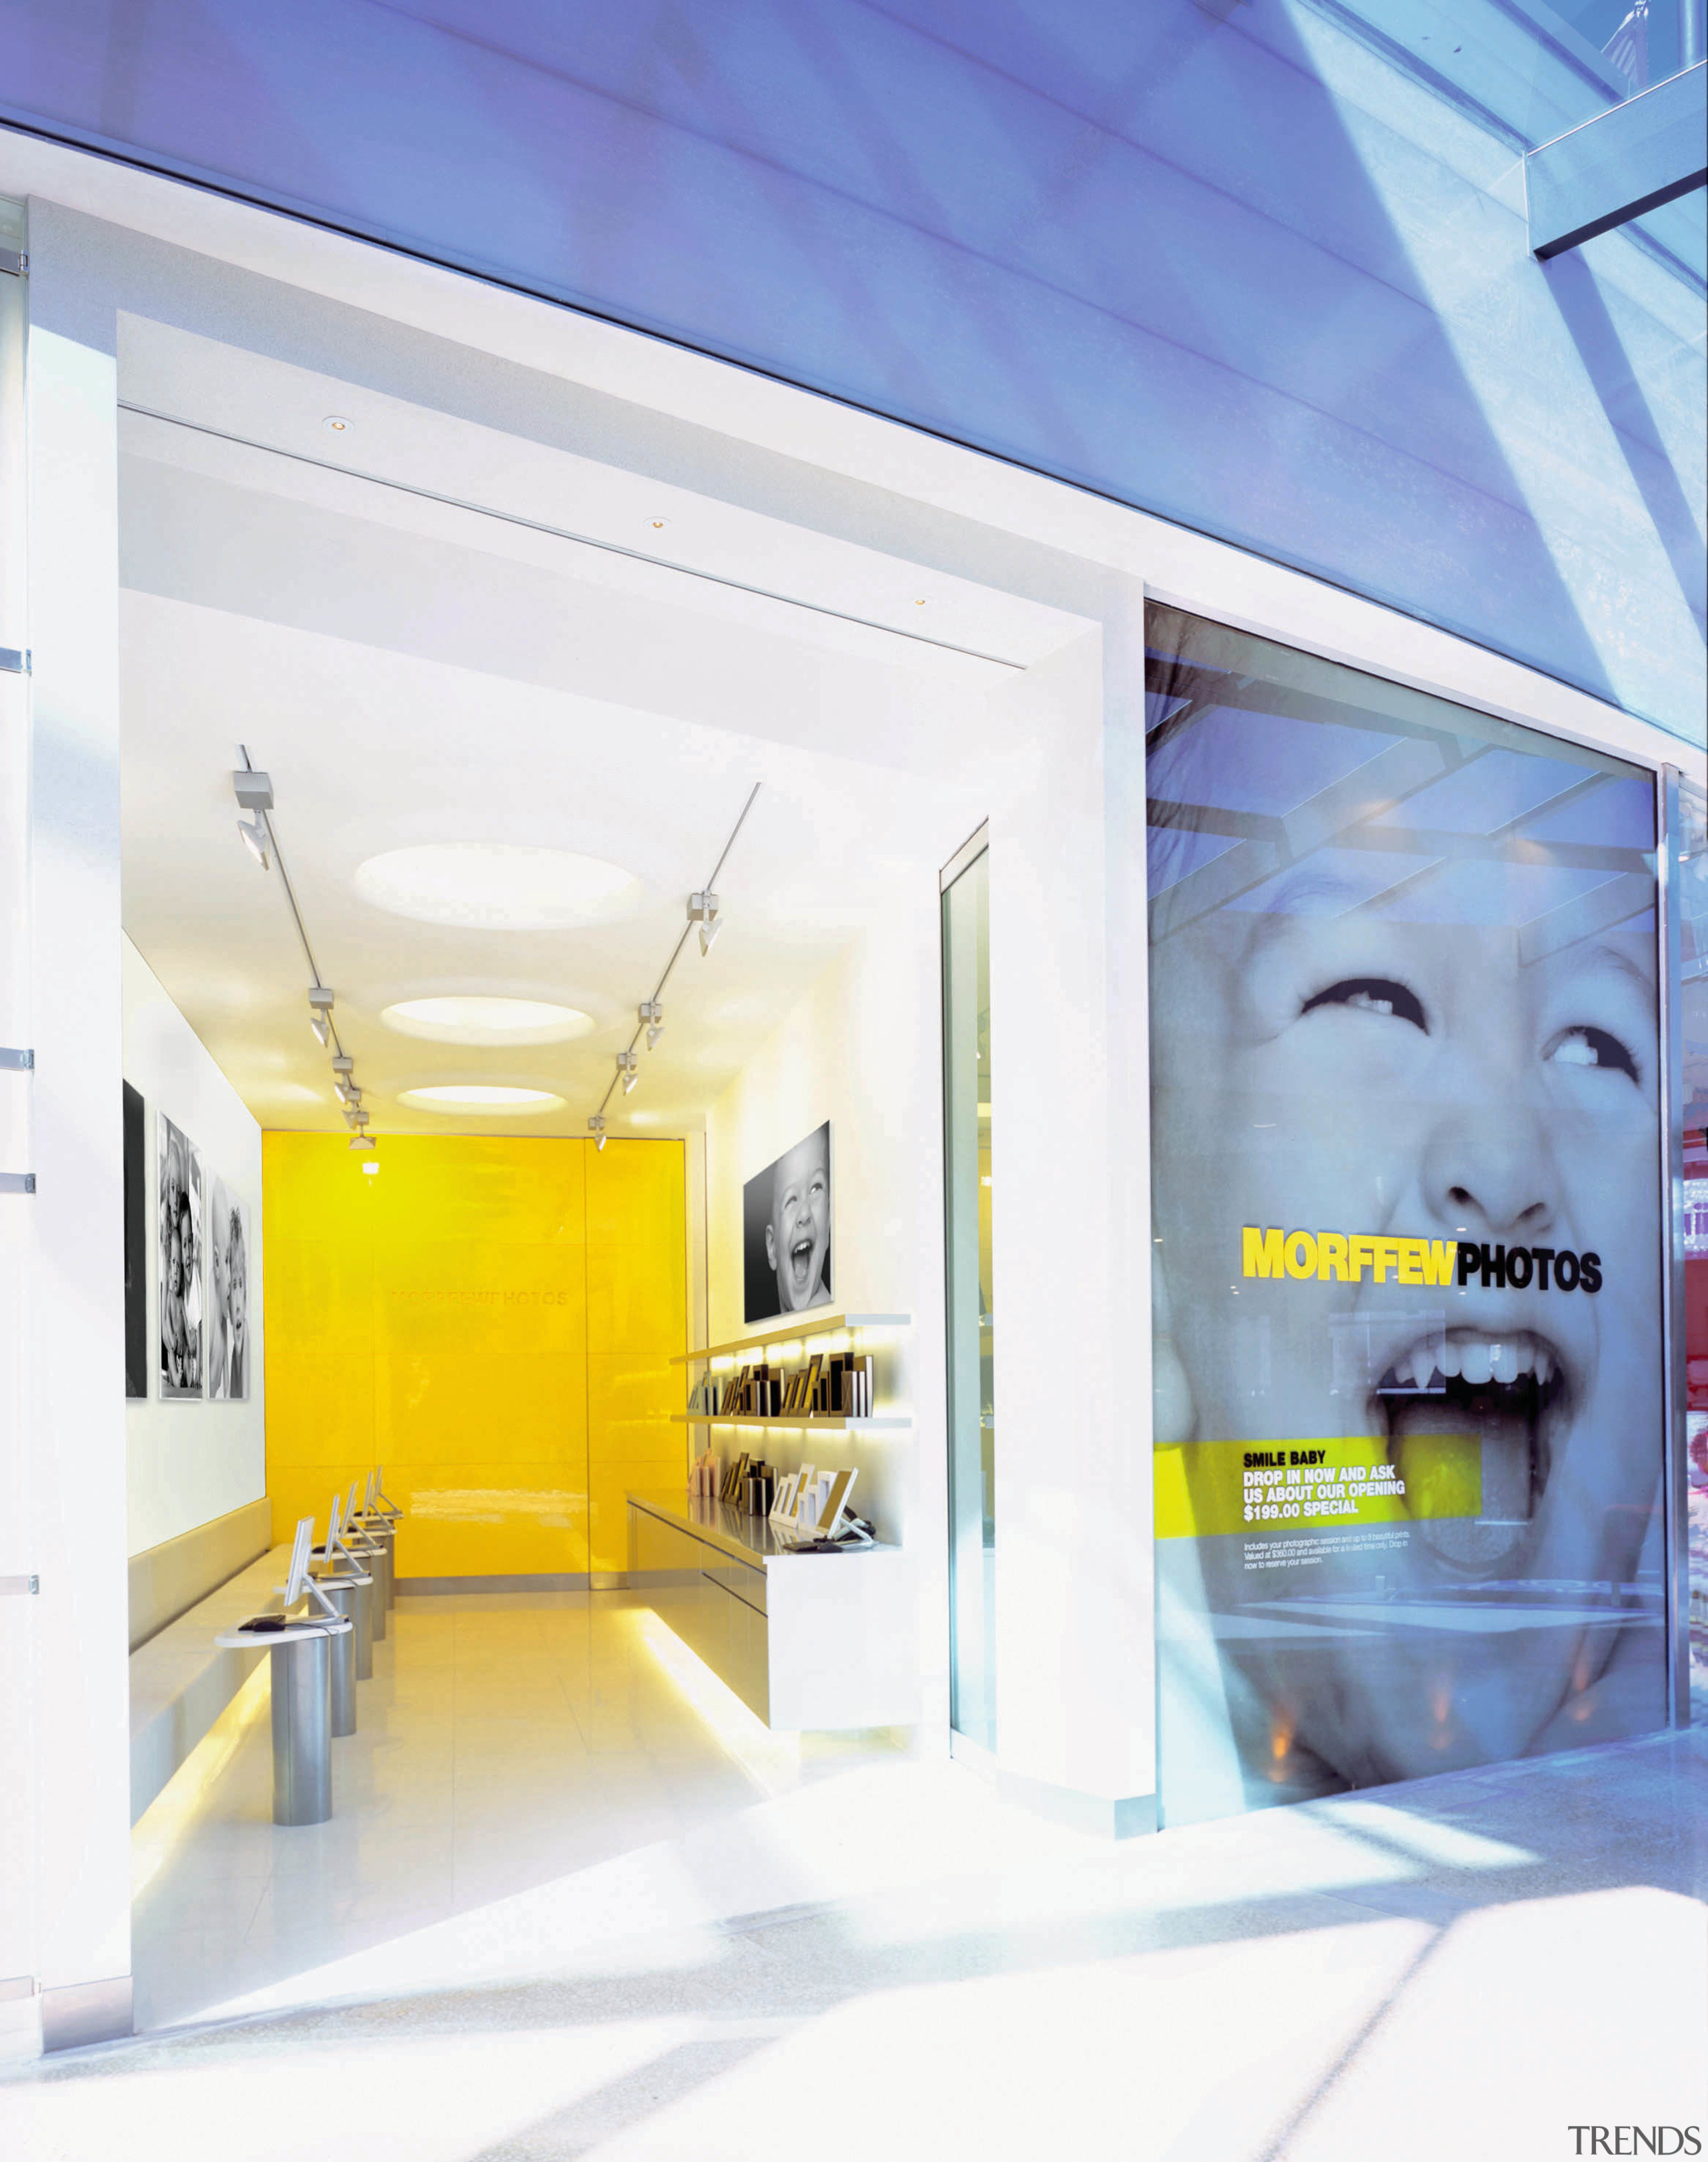 View of a showroom, many photos, many laptops ceiling, interior design, product design, wall, yellow, white